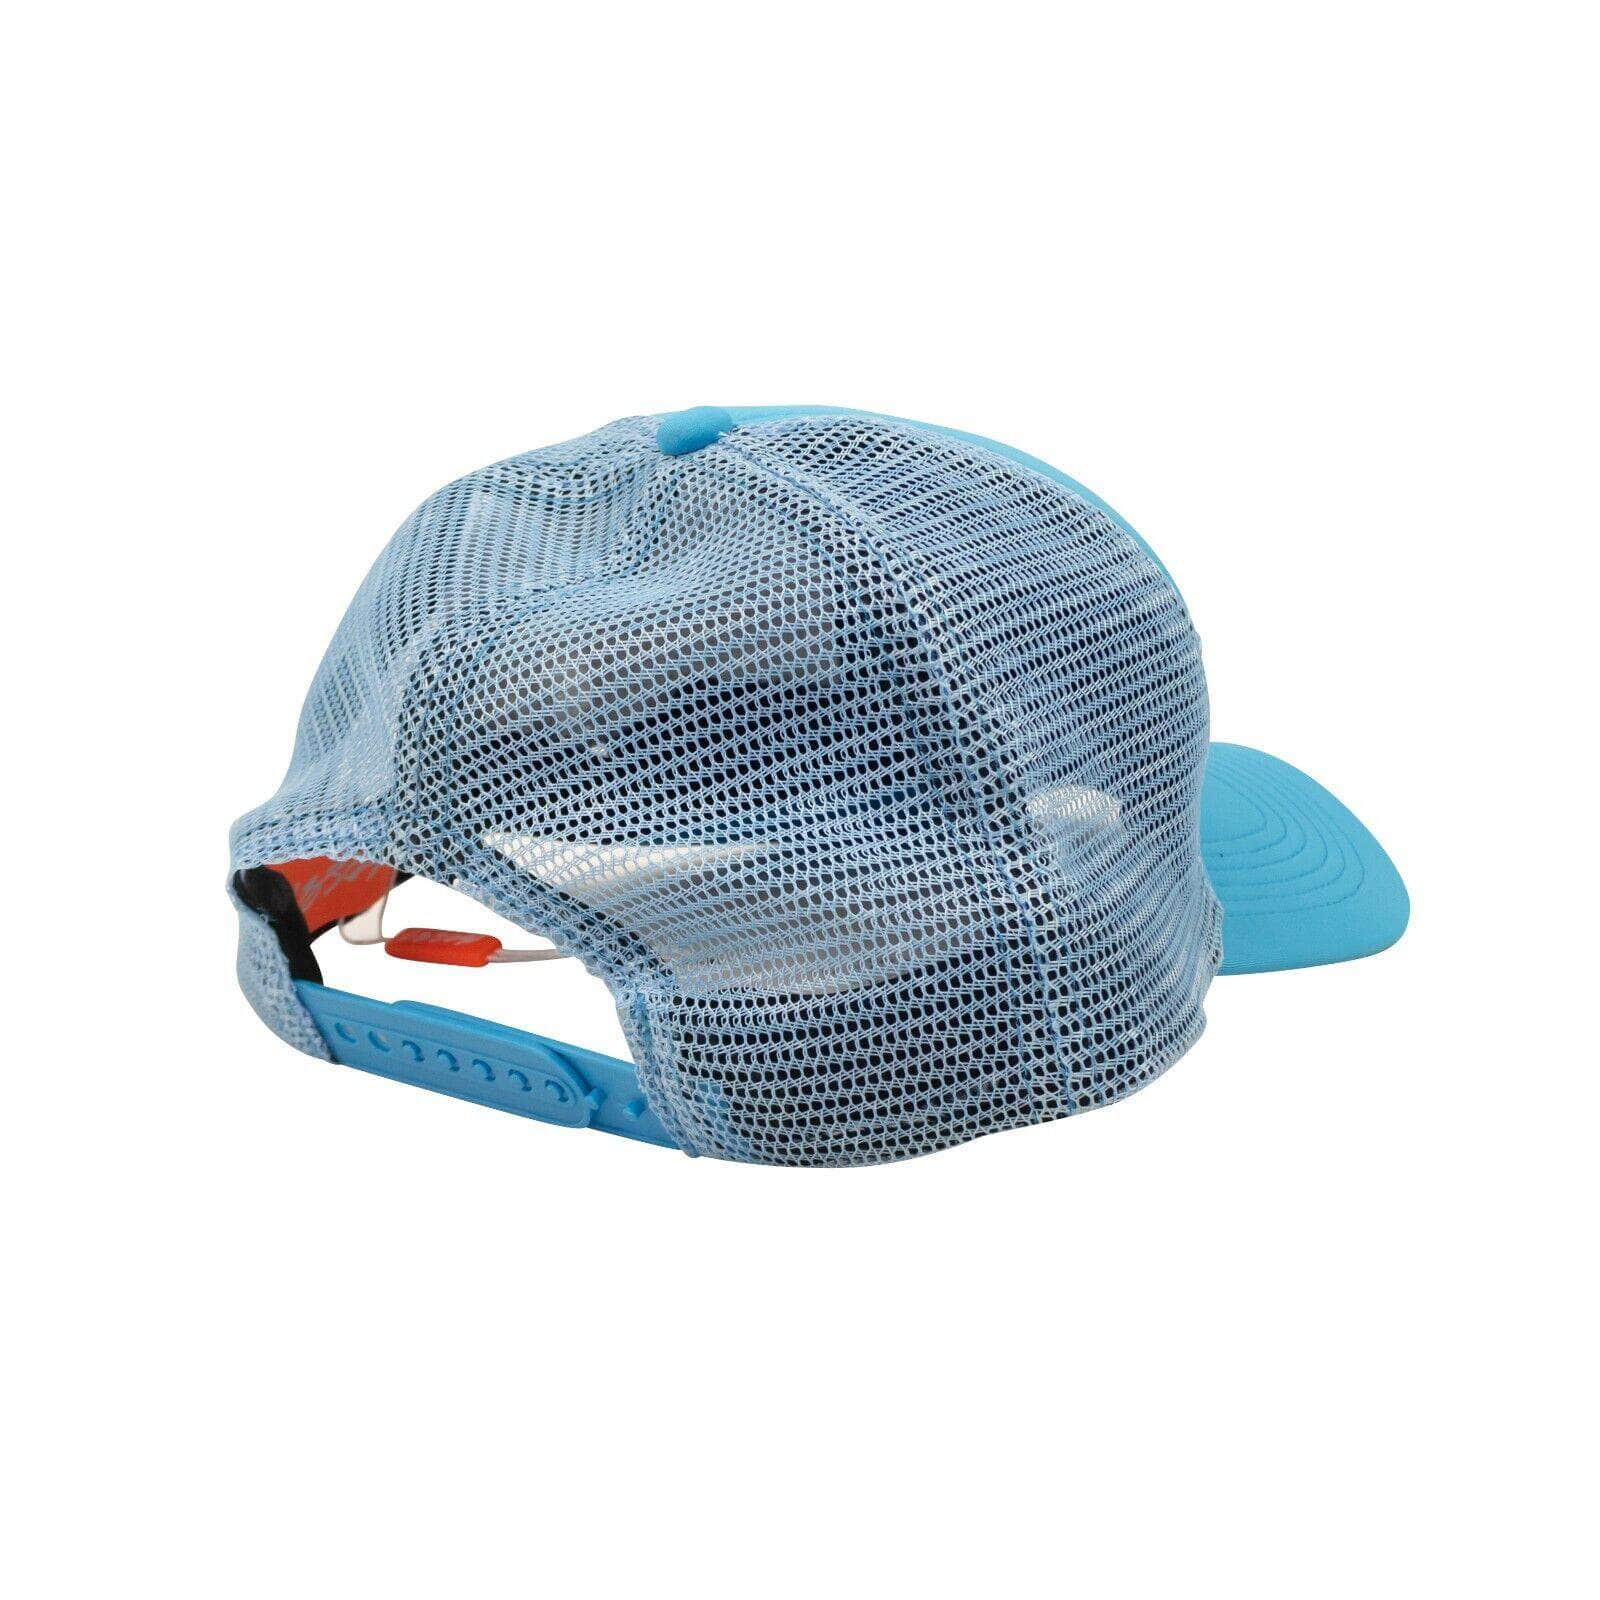 Bossi bossi, channelenable-all, chicmi, couponcollection, gender-mens, main-accessories, mens-shoes, size-os, under-250 OS Baby Blue Skull Logo Trucker Hat BOS-XACC-0001/OS BOS-XACC-0001/OS